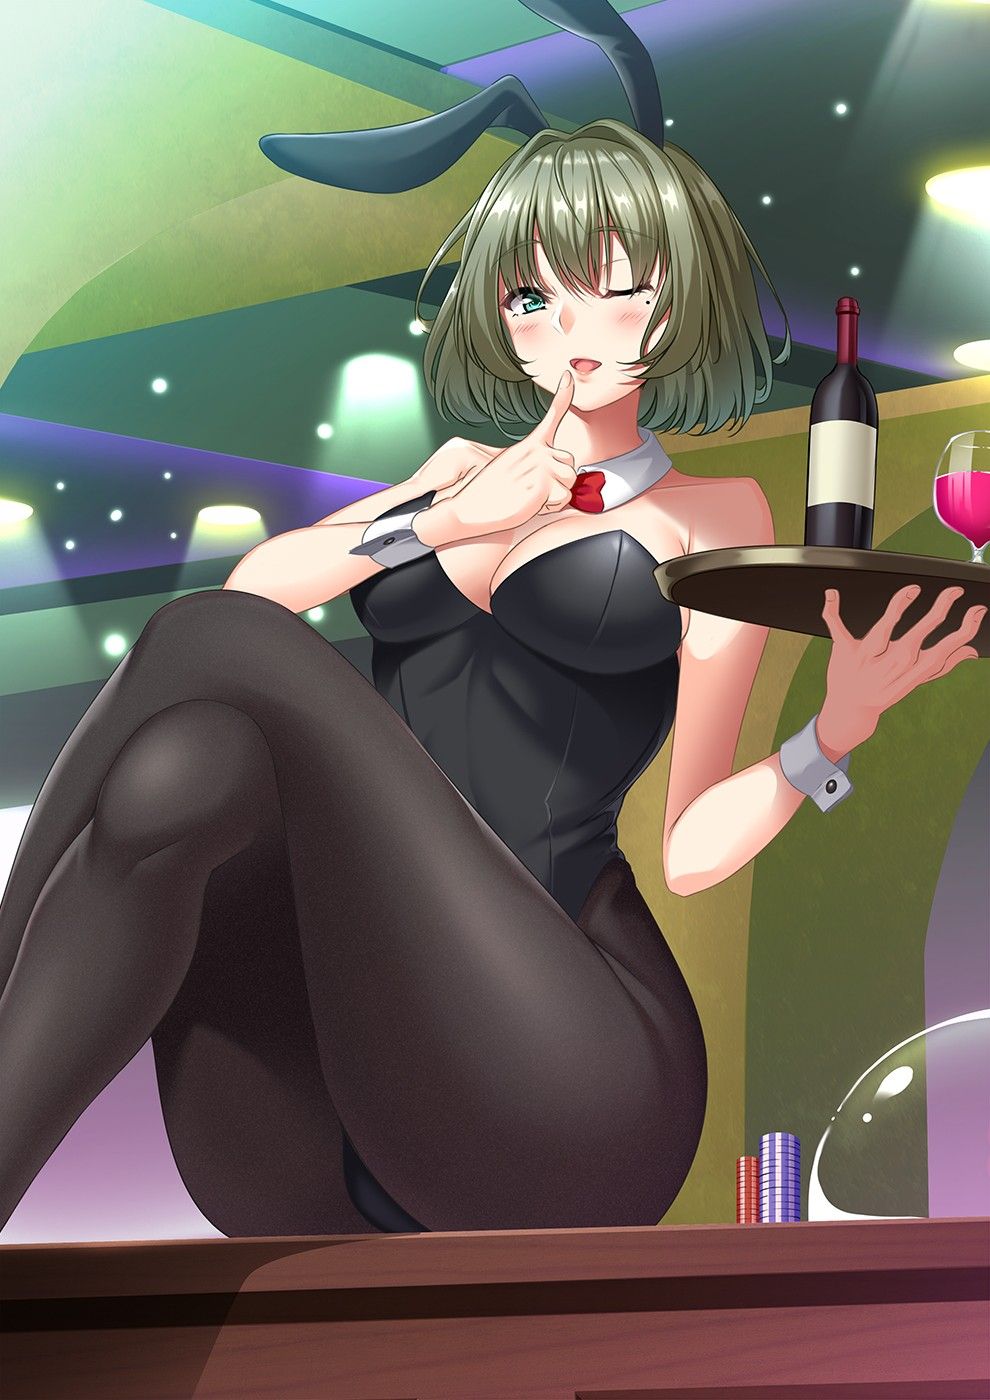 [2nd] Sexy Bunny Girl Pretty Second Erotic Image Part 38 [Bunny Girl] 7